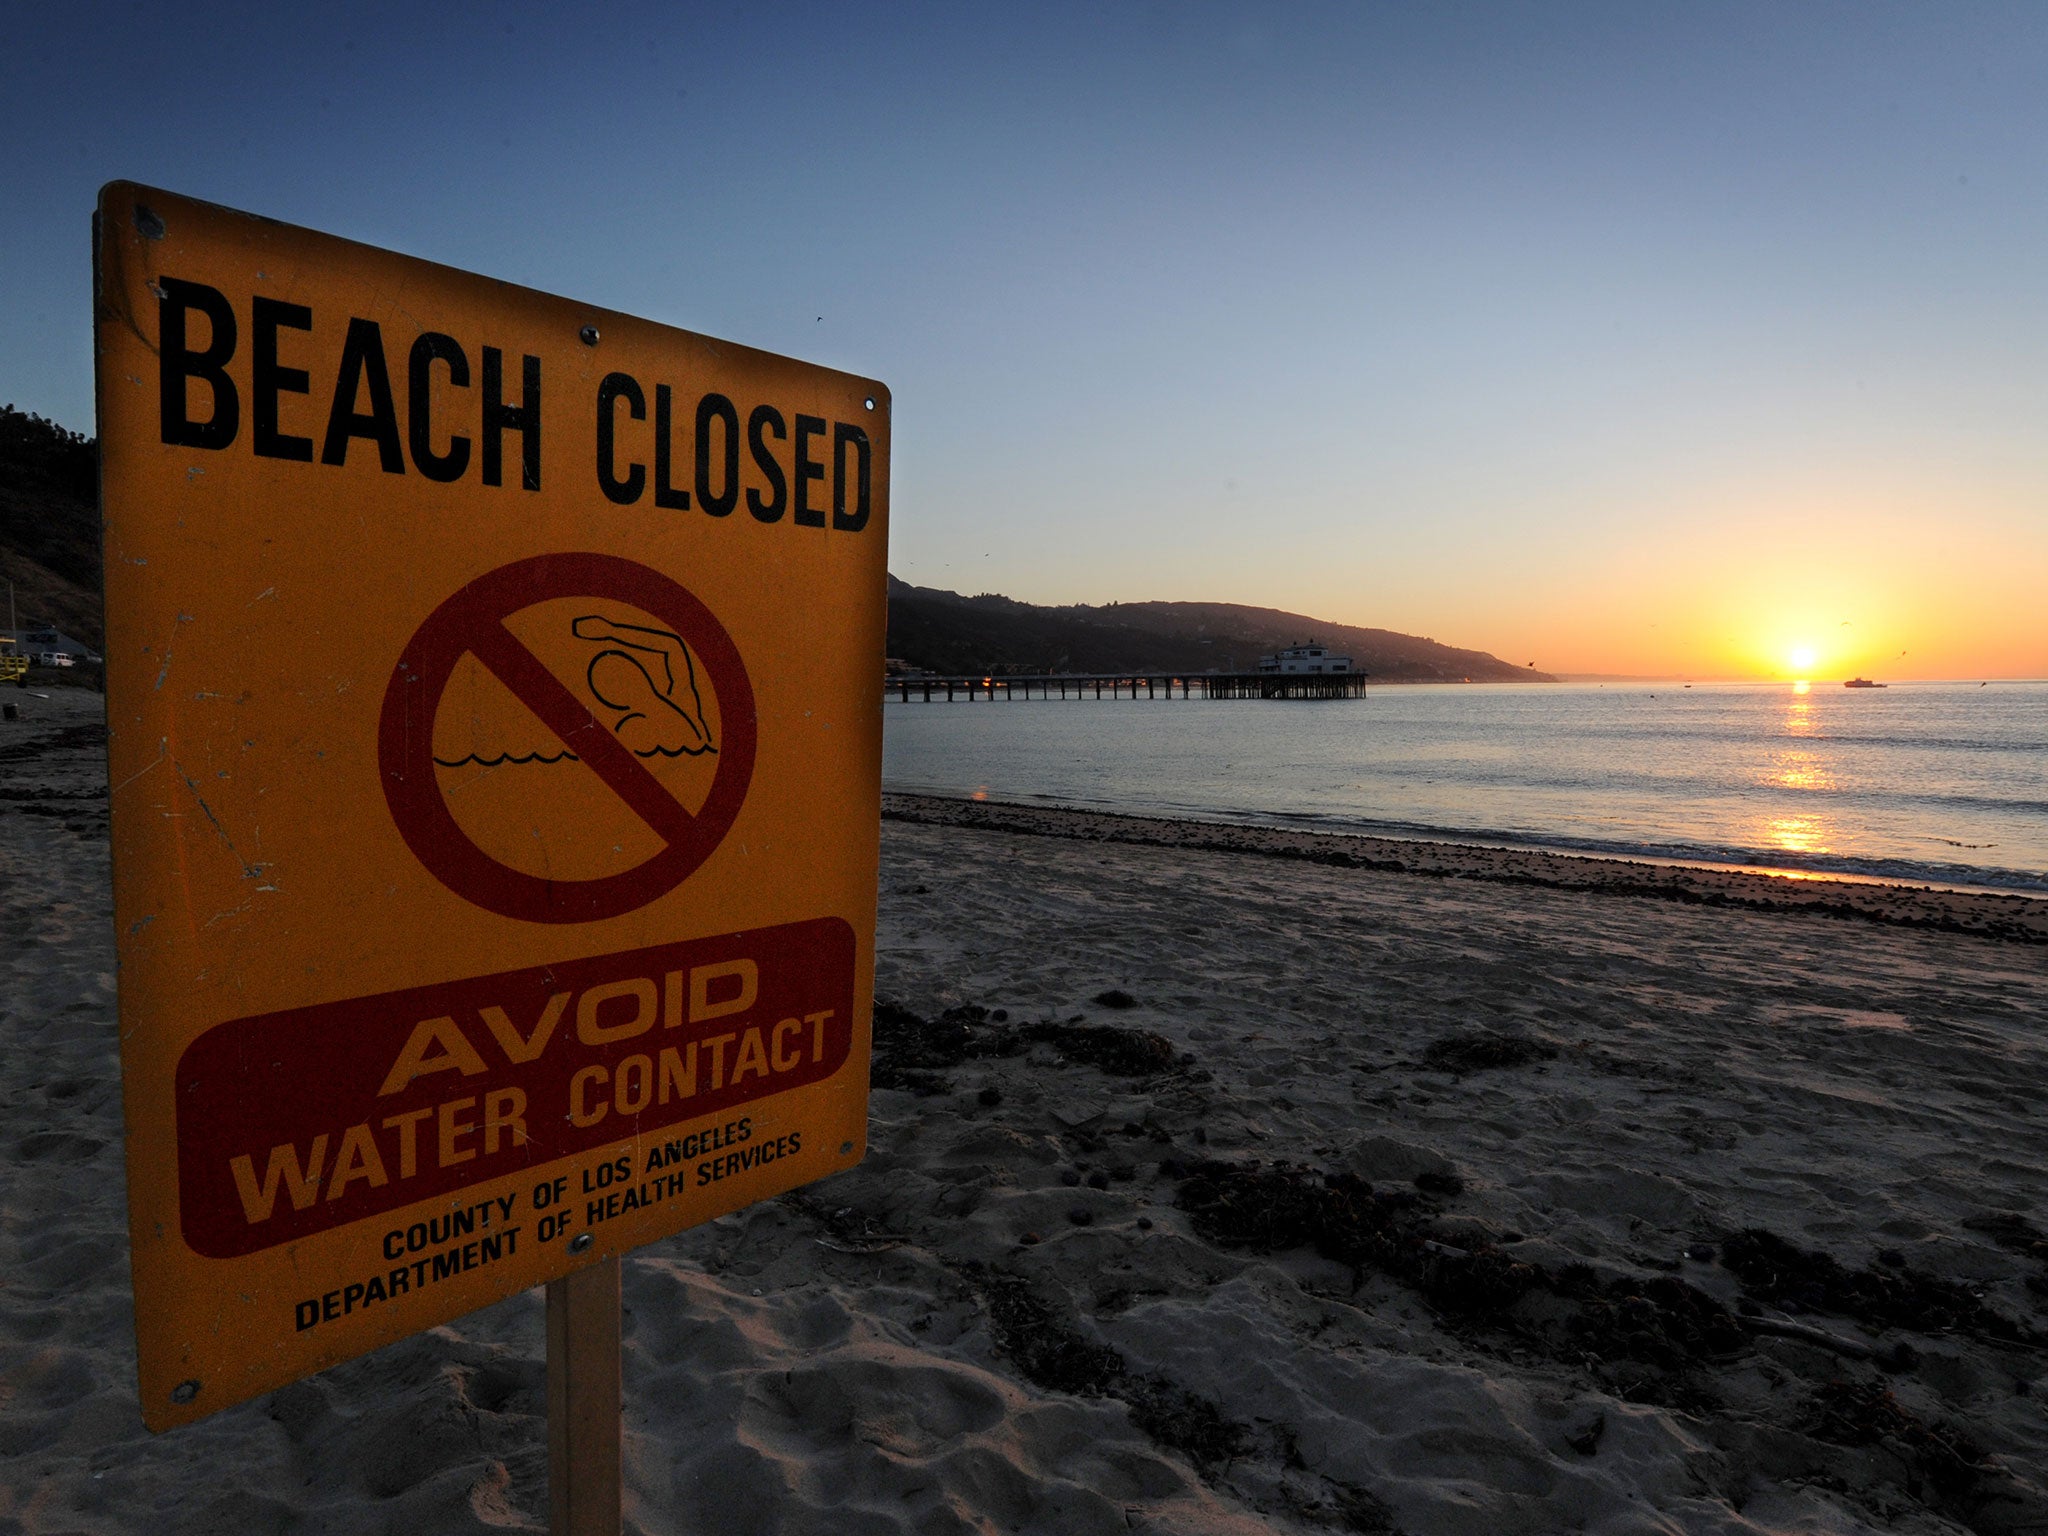 A beach closed sign warns against contaminated water